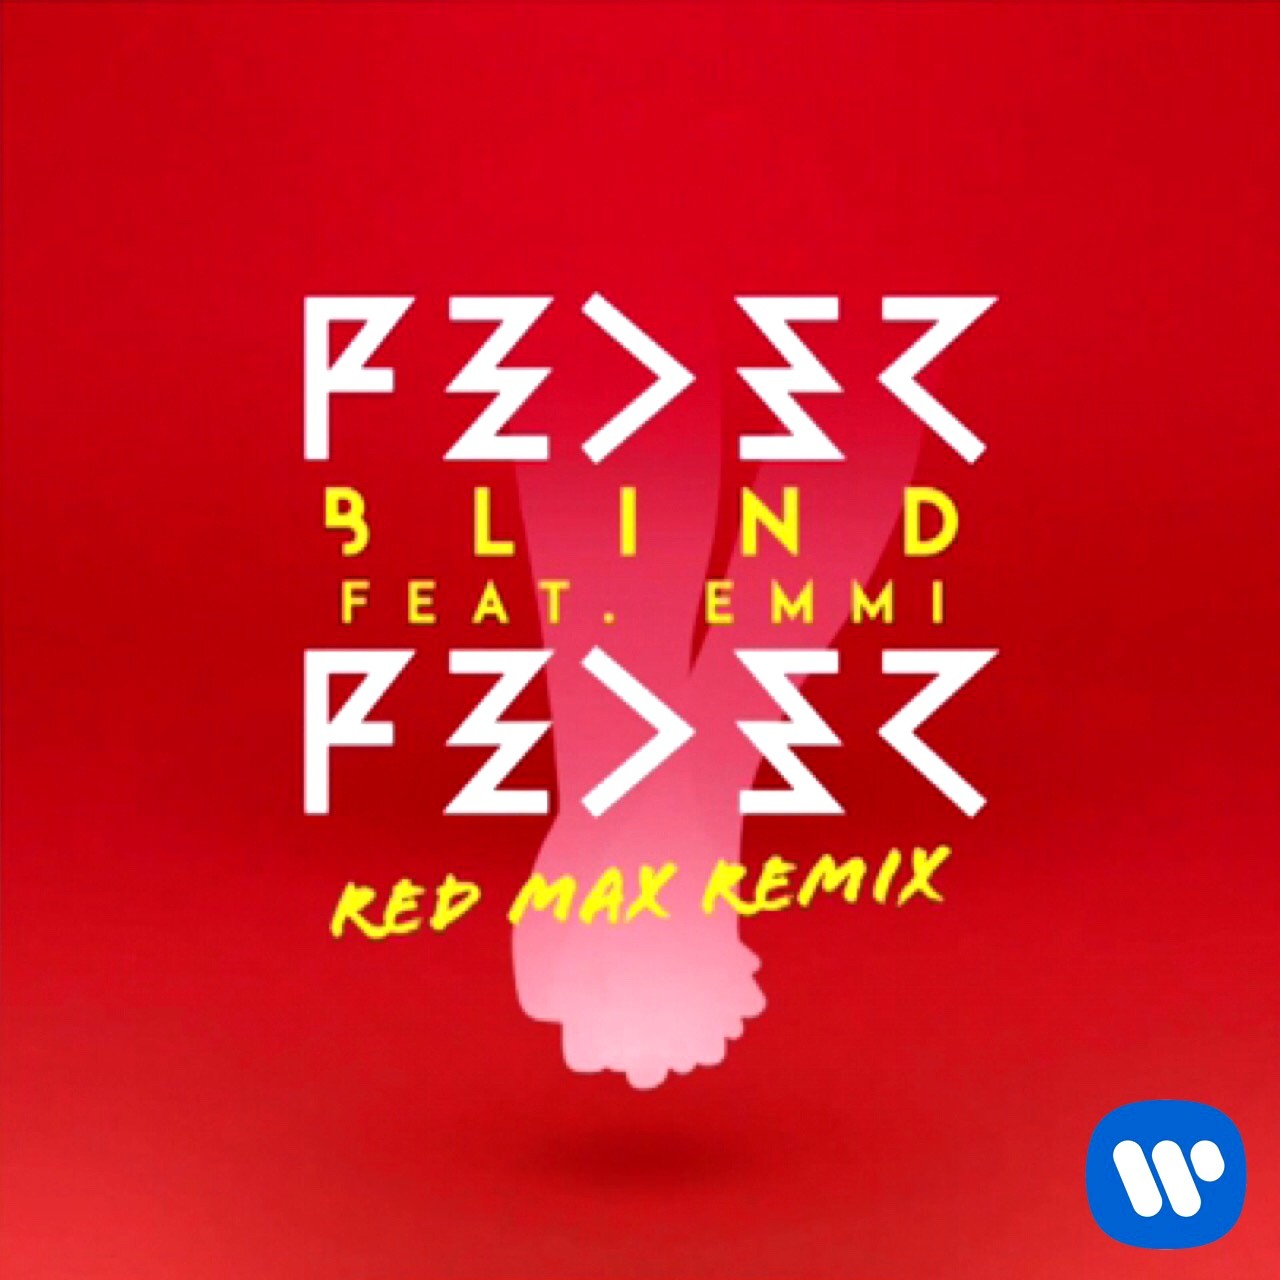 Feder featuring EMMY — Blind (Red Max Remix) cover artwork